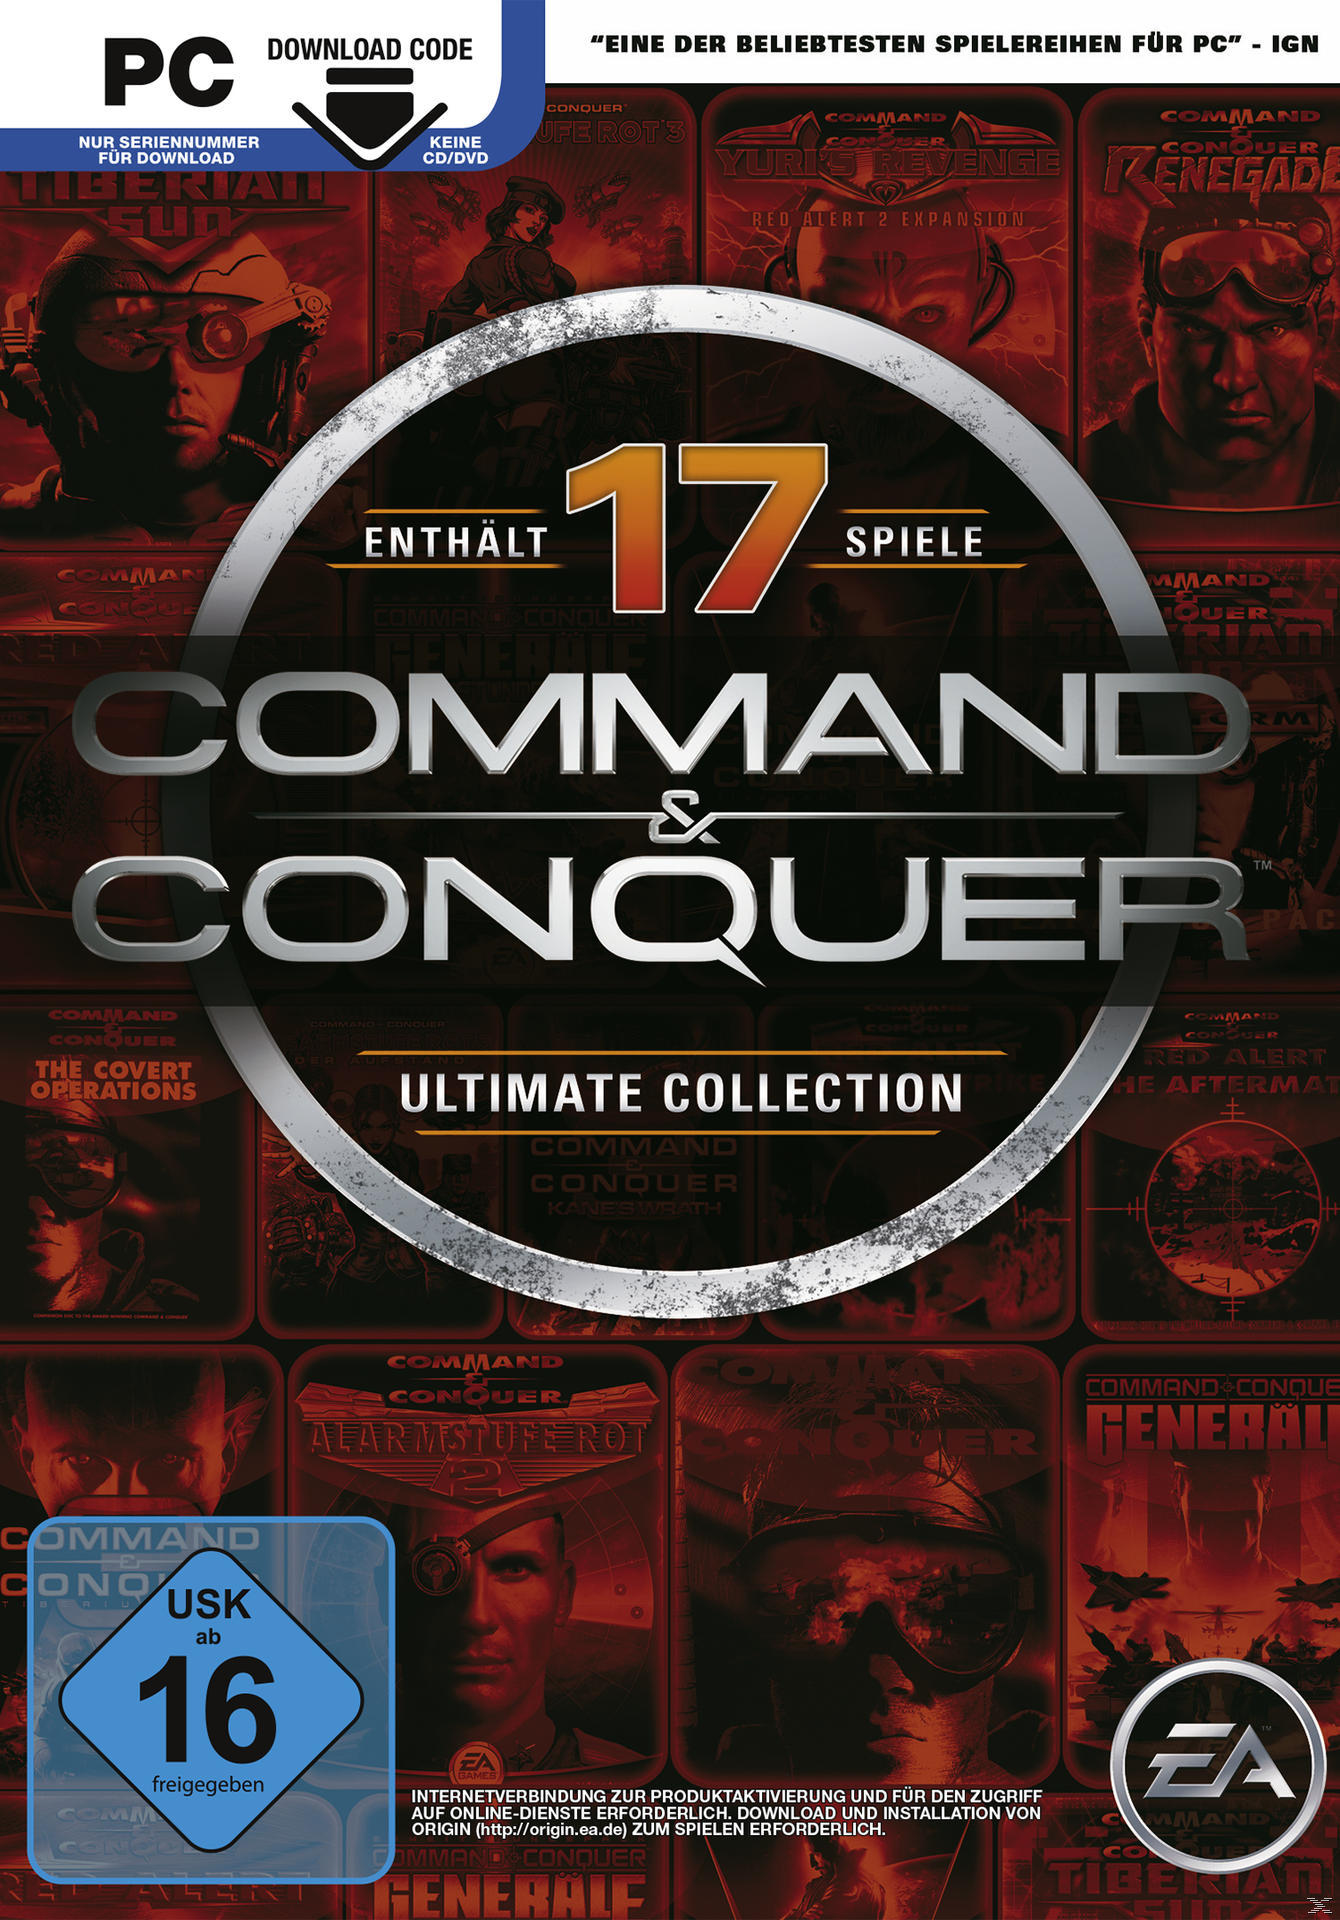 [PC] Command & - Collection Conquer Ultimate